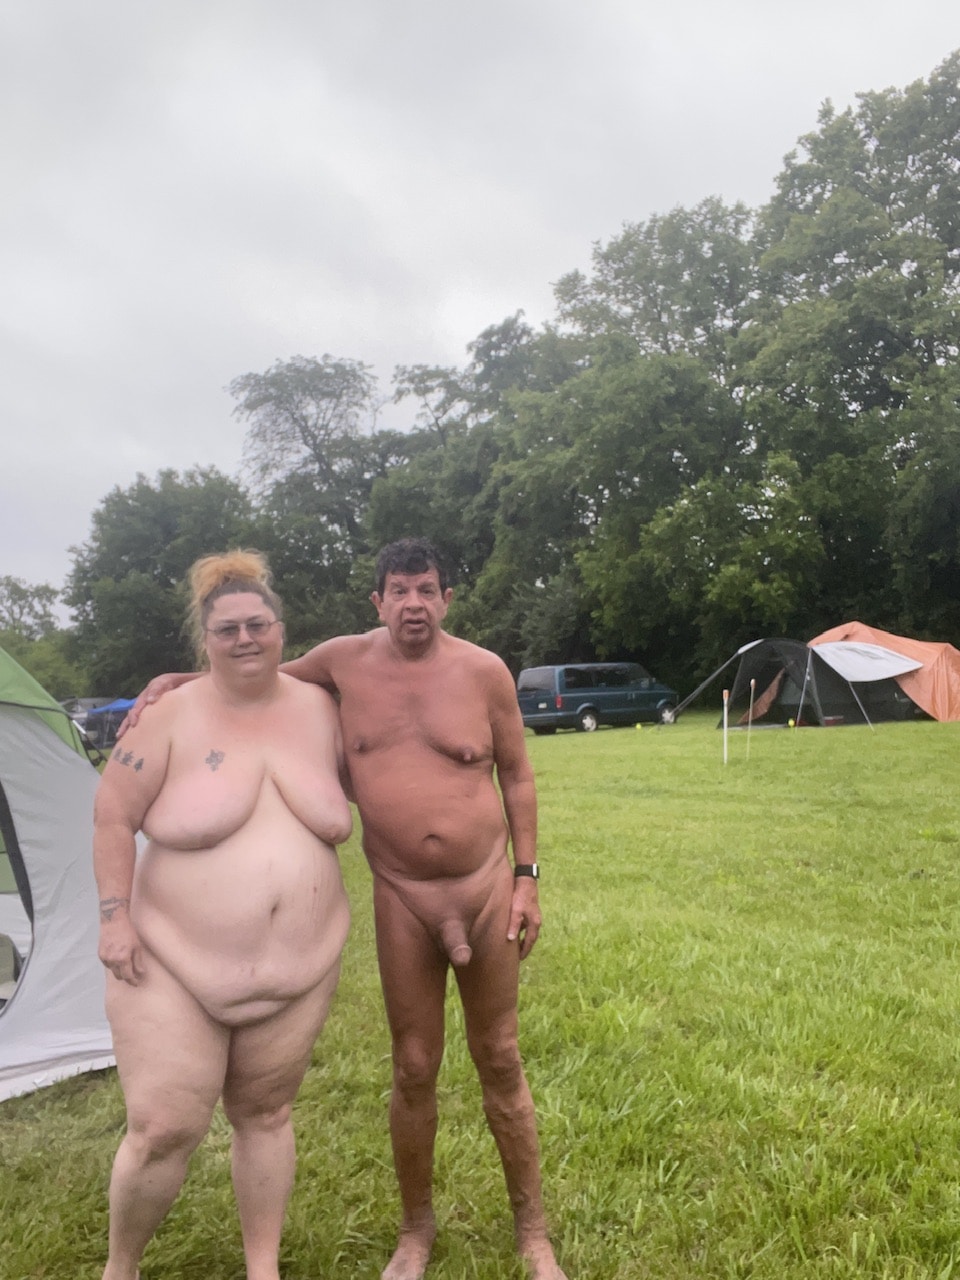 swedishi wemen nude - We love camping in the nude - Real Amateurs